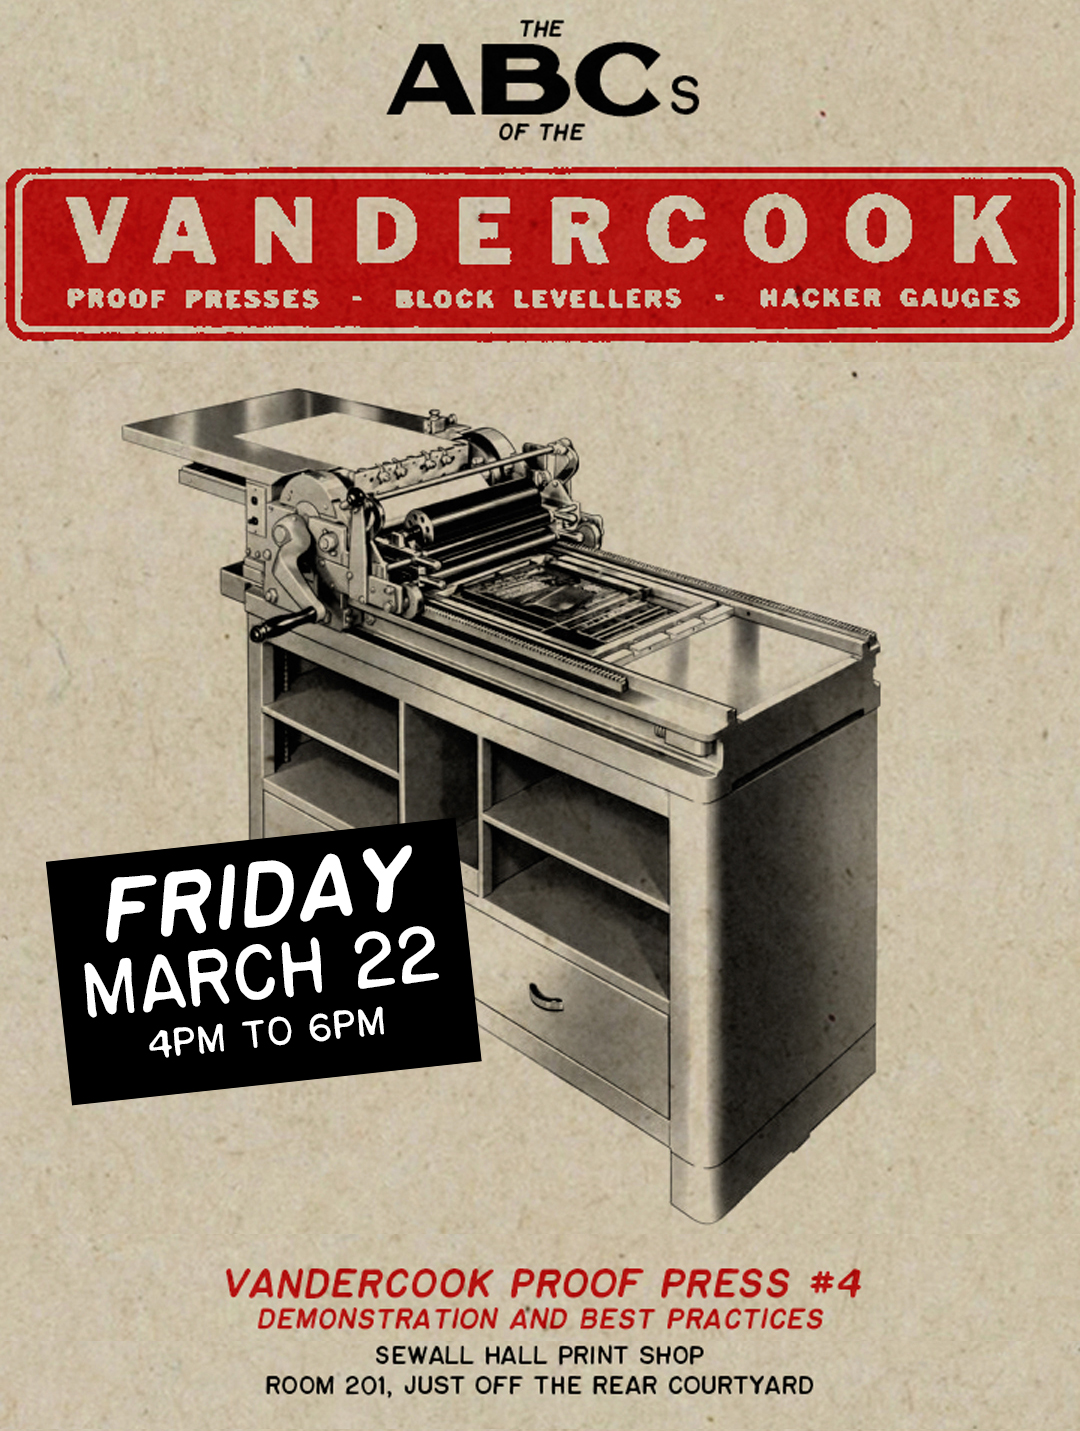 The ABCs of the Vandercook Proof Press #4; demonstration and best practices